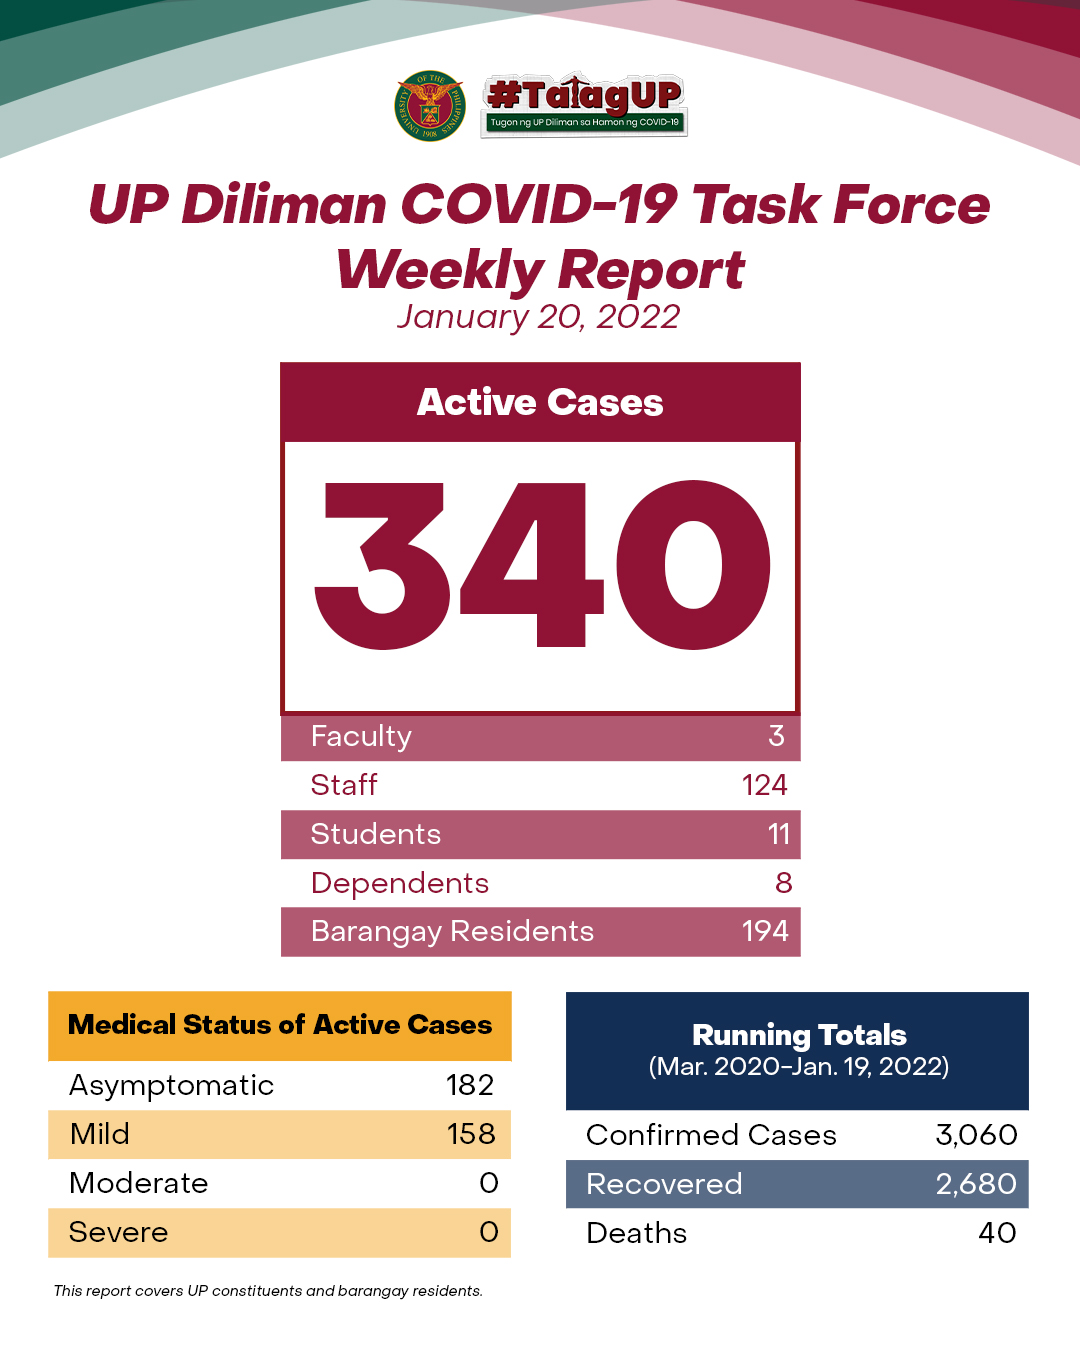 UP Diliman COVID-19 Task Force Weekly Report (January 20, 2022)